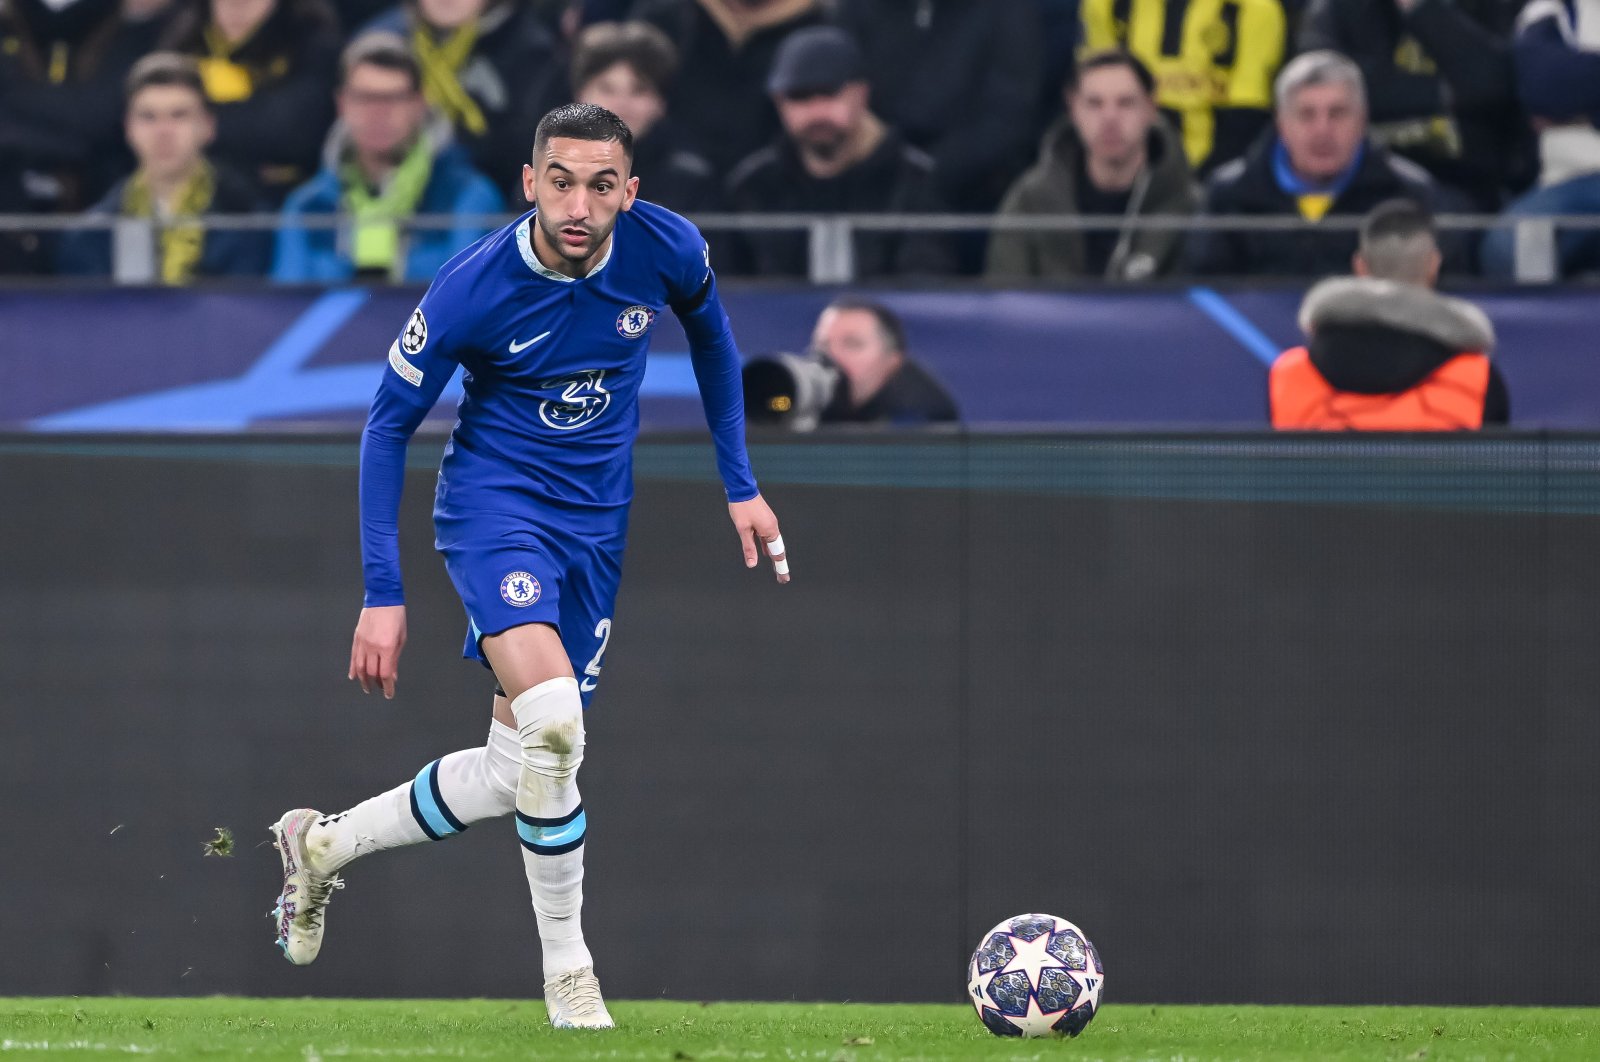 Chelsea&#039;s Hakim Ziyech controls the Ball during the UEFA Champions League round of 16 leg one match against Borussia Dortmund at Signal Iduna Park, Dortmund, Germany, Feb. 15, 2023. (Getty Images Photo)